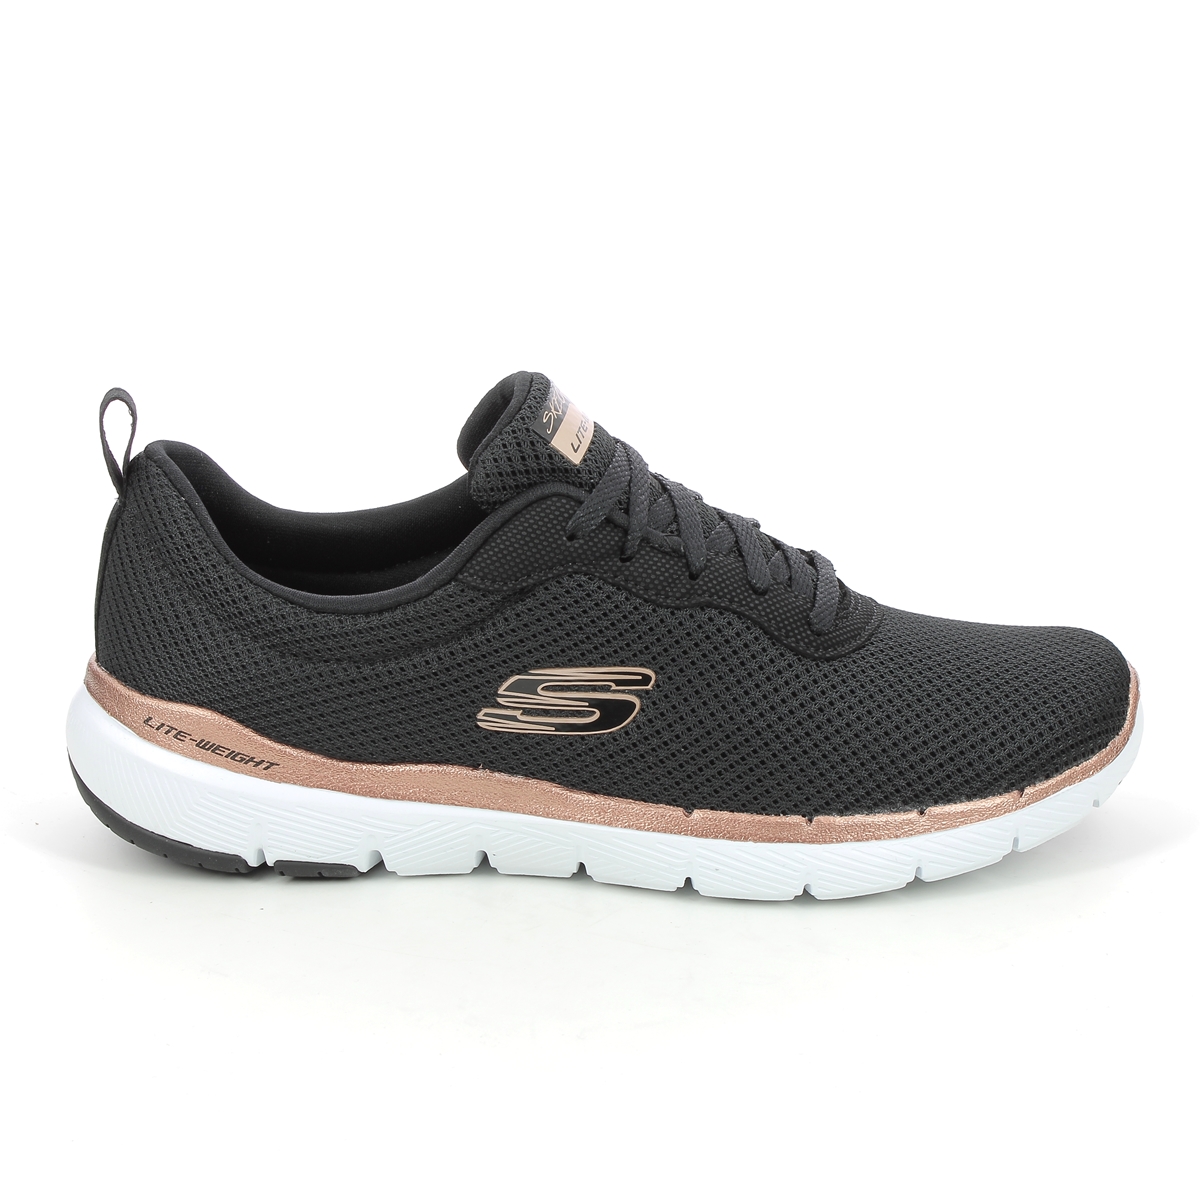 Skechers First Insight BKRG Black Rose Gold Womens trainers 13070